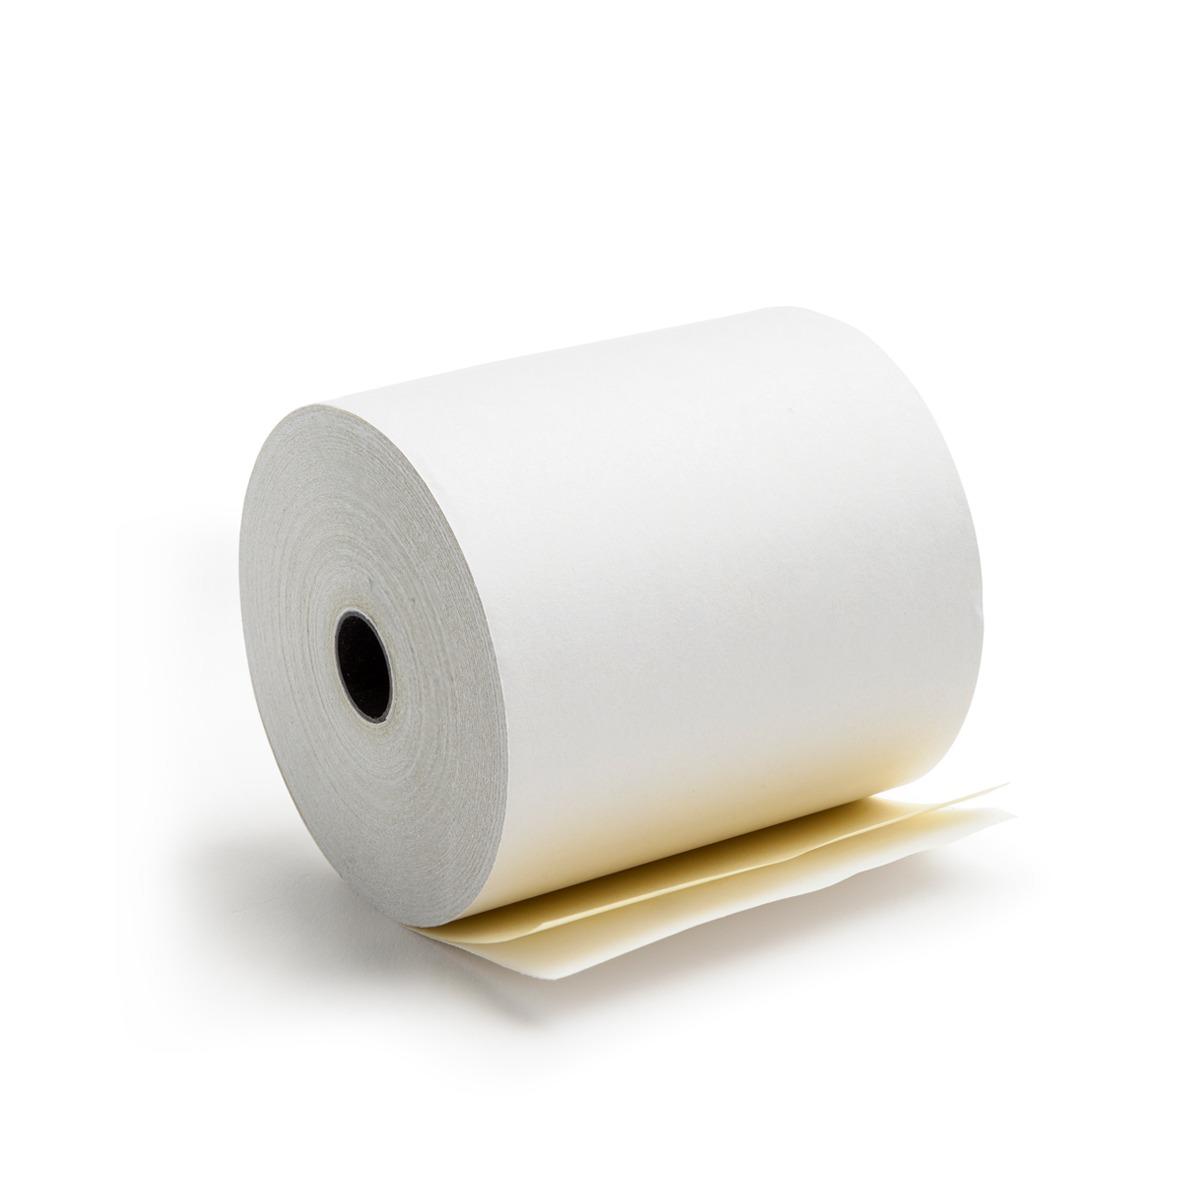 ROLLO PAPEL P/MAQ 57 MM X 20 MTS X 10 QUIMICO MAUGER